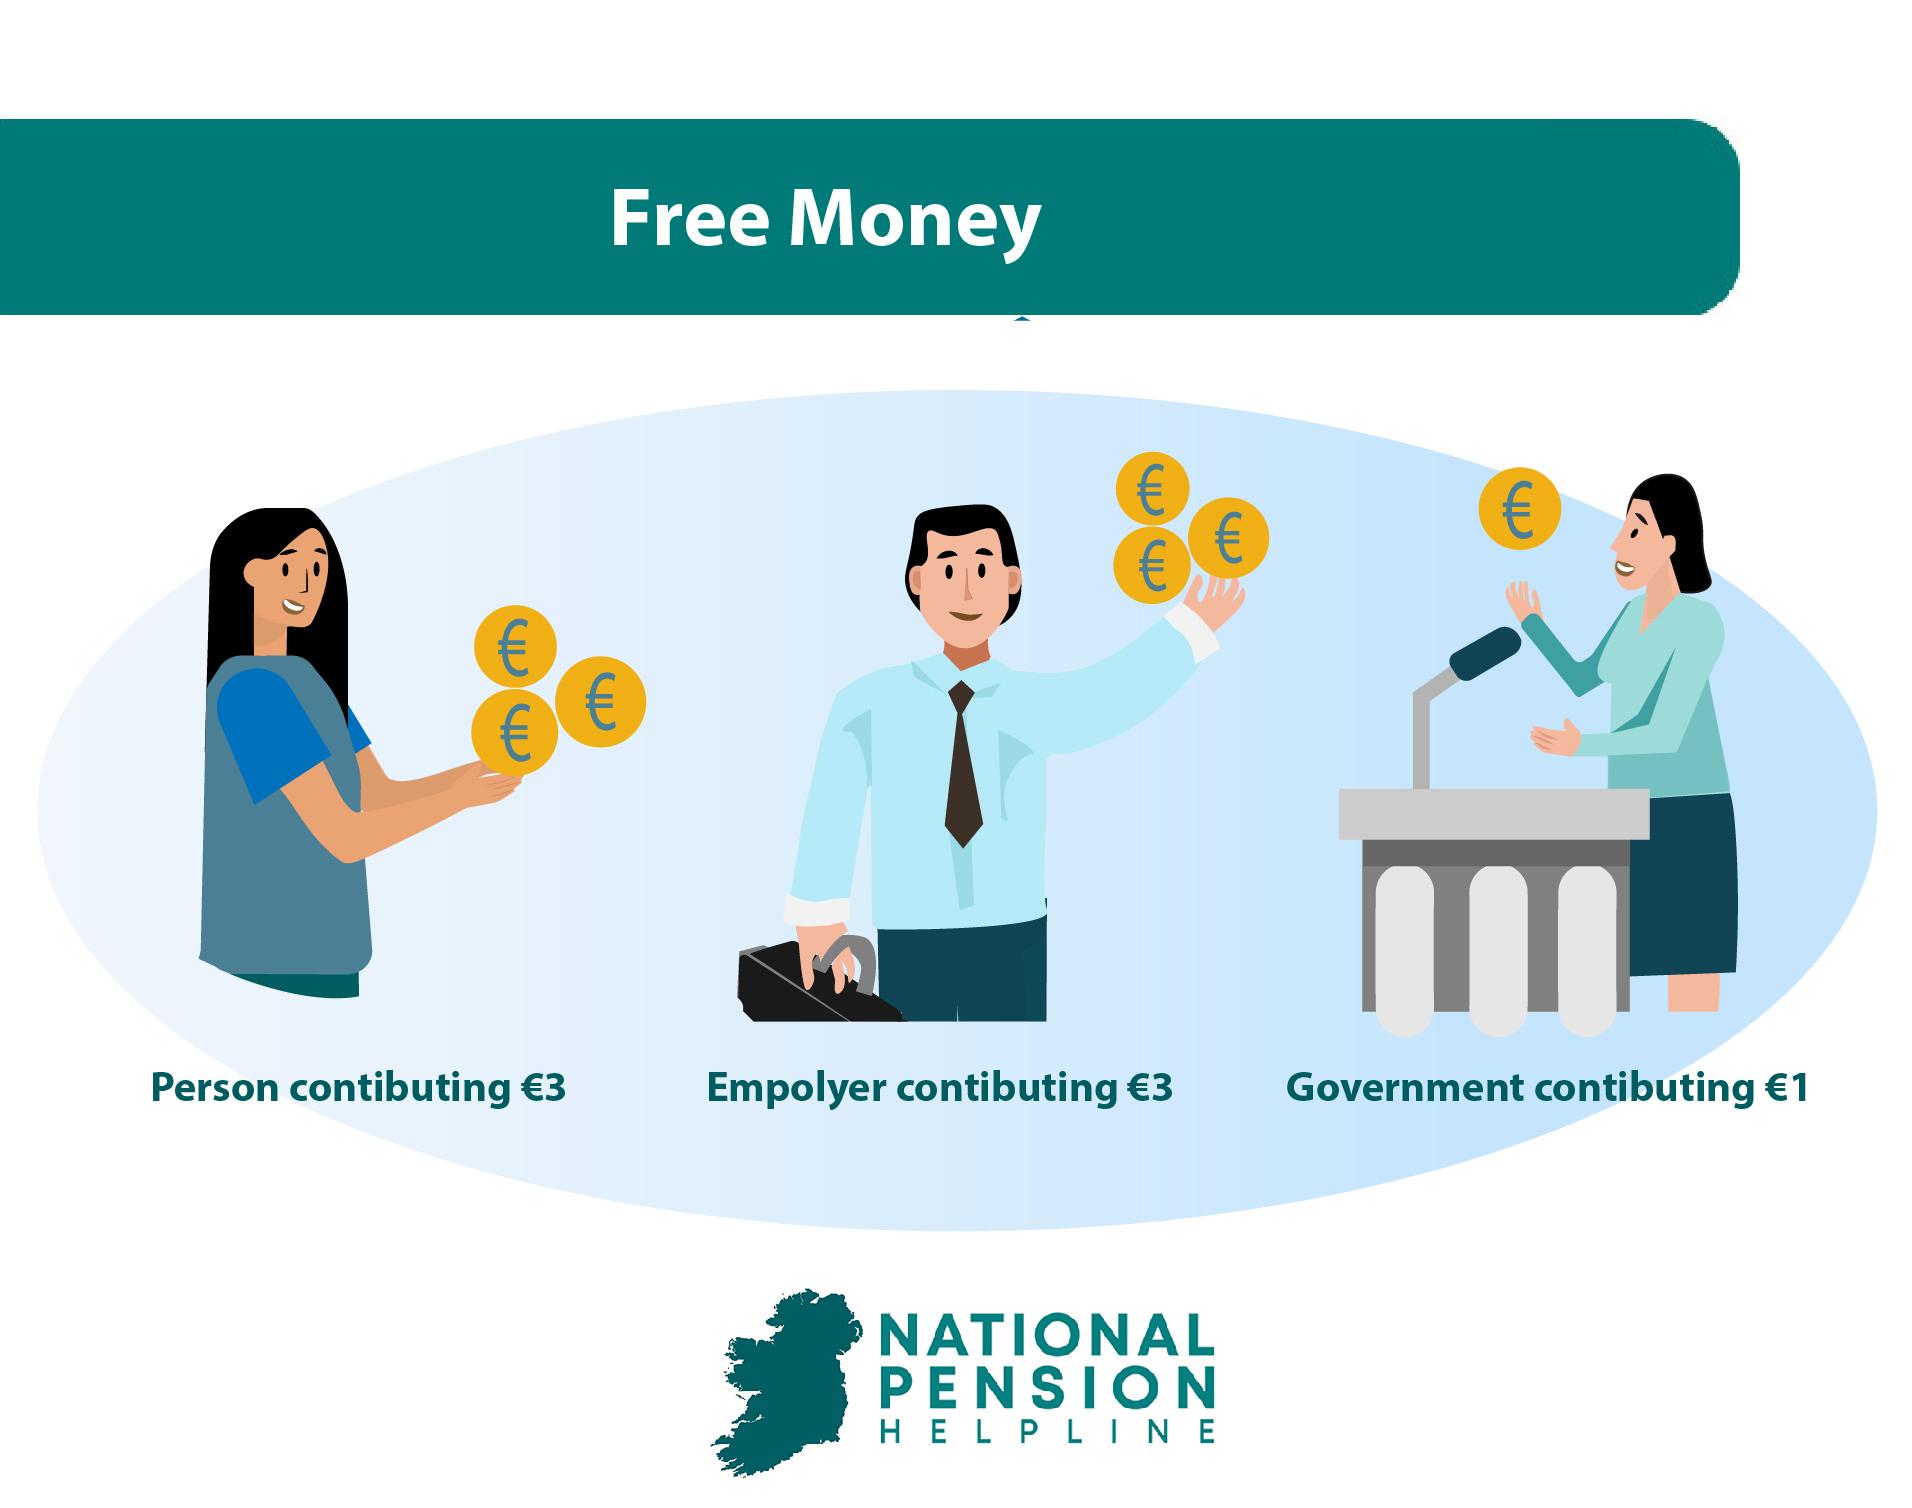 Free Money in your pension